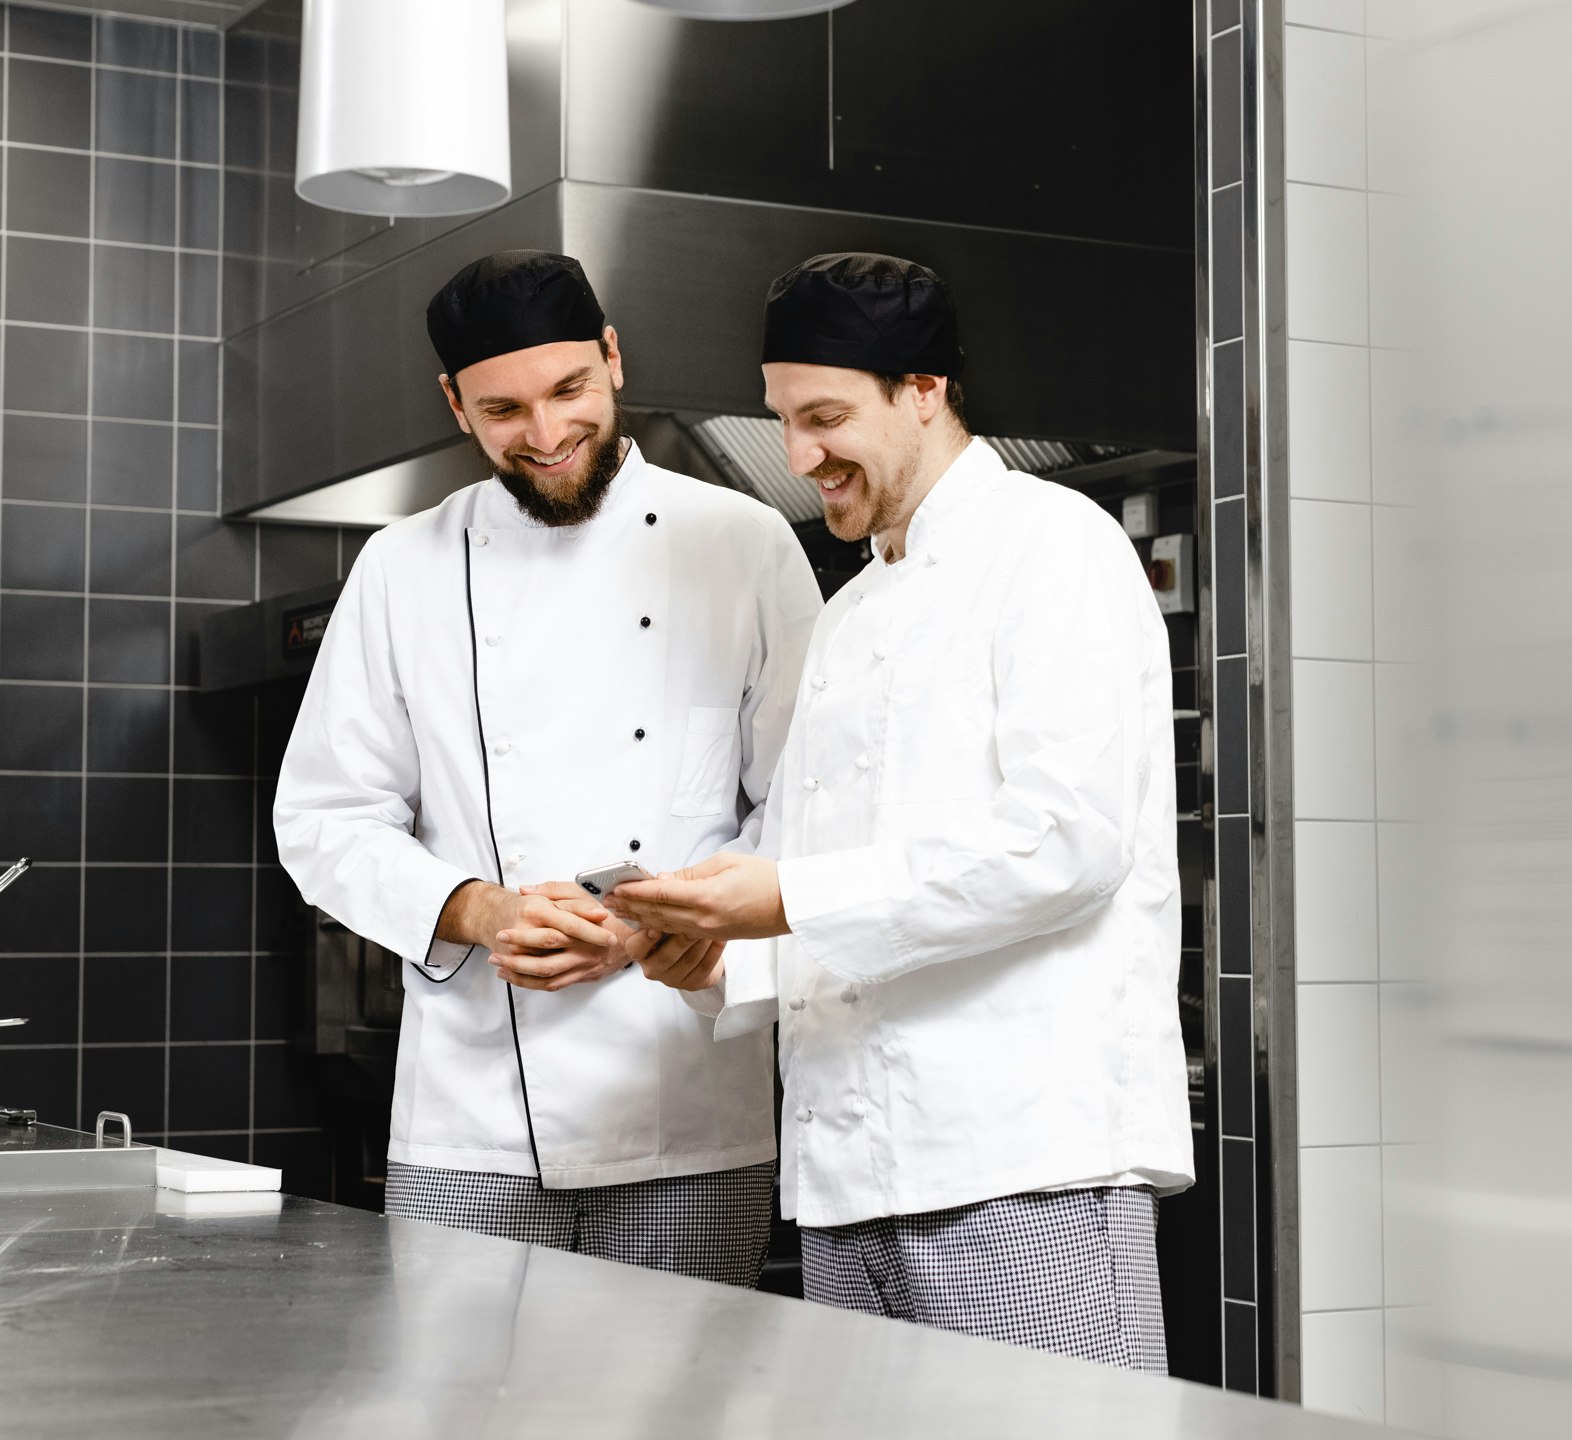 Two employees standing in the kitchen looking at a phone